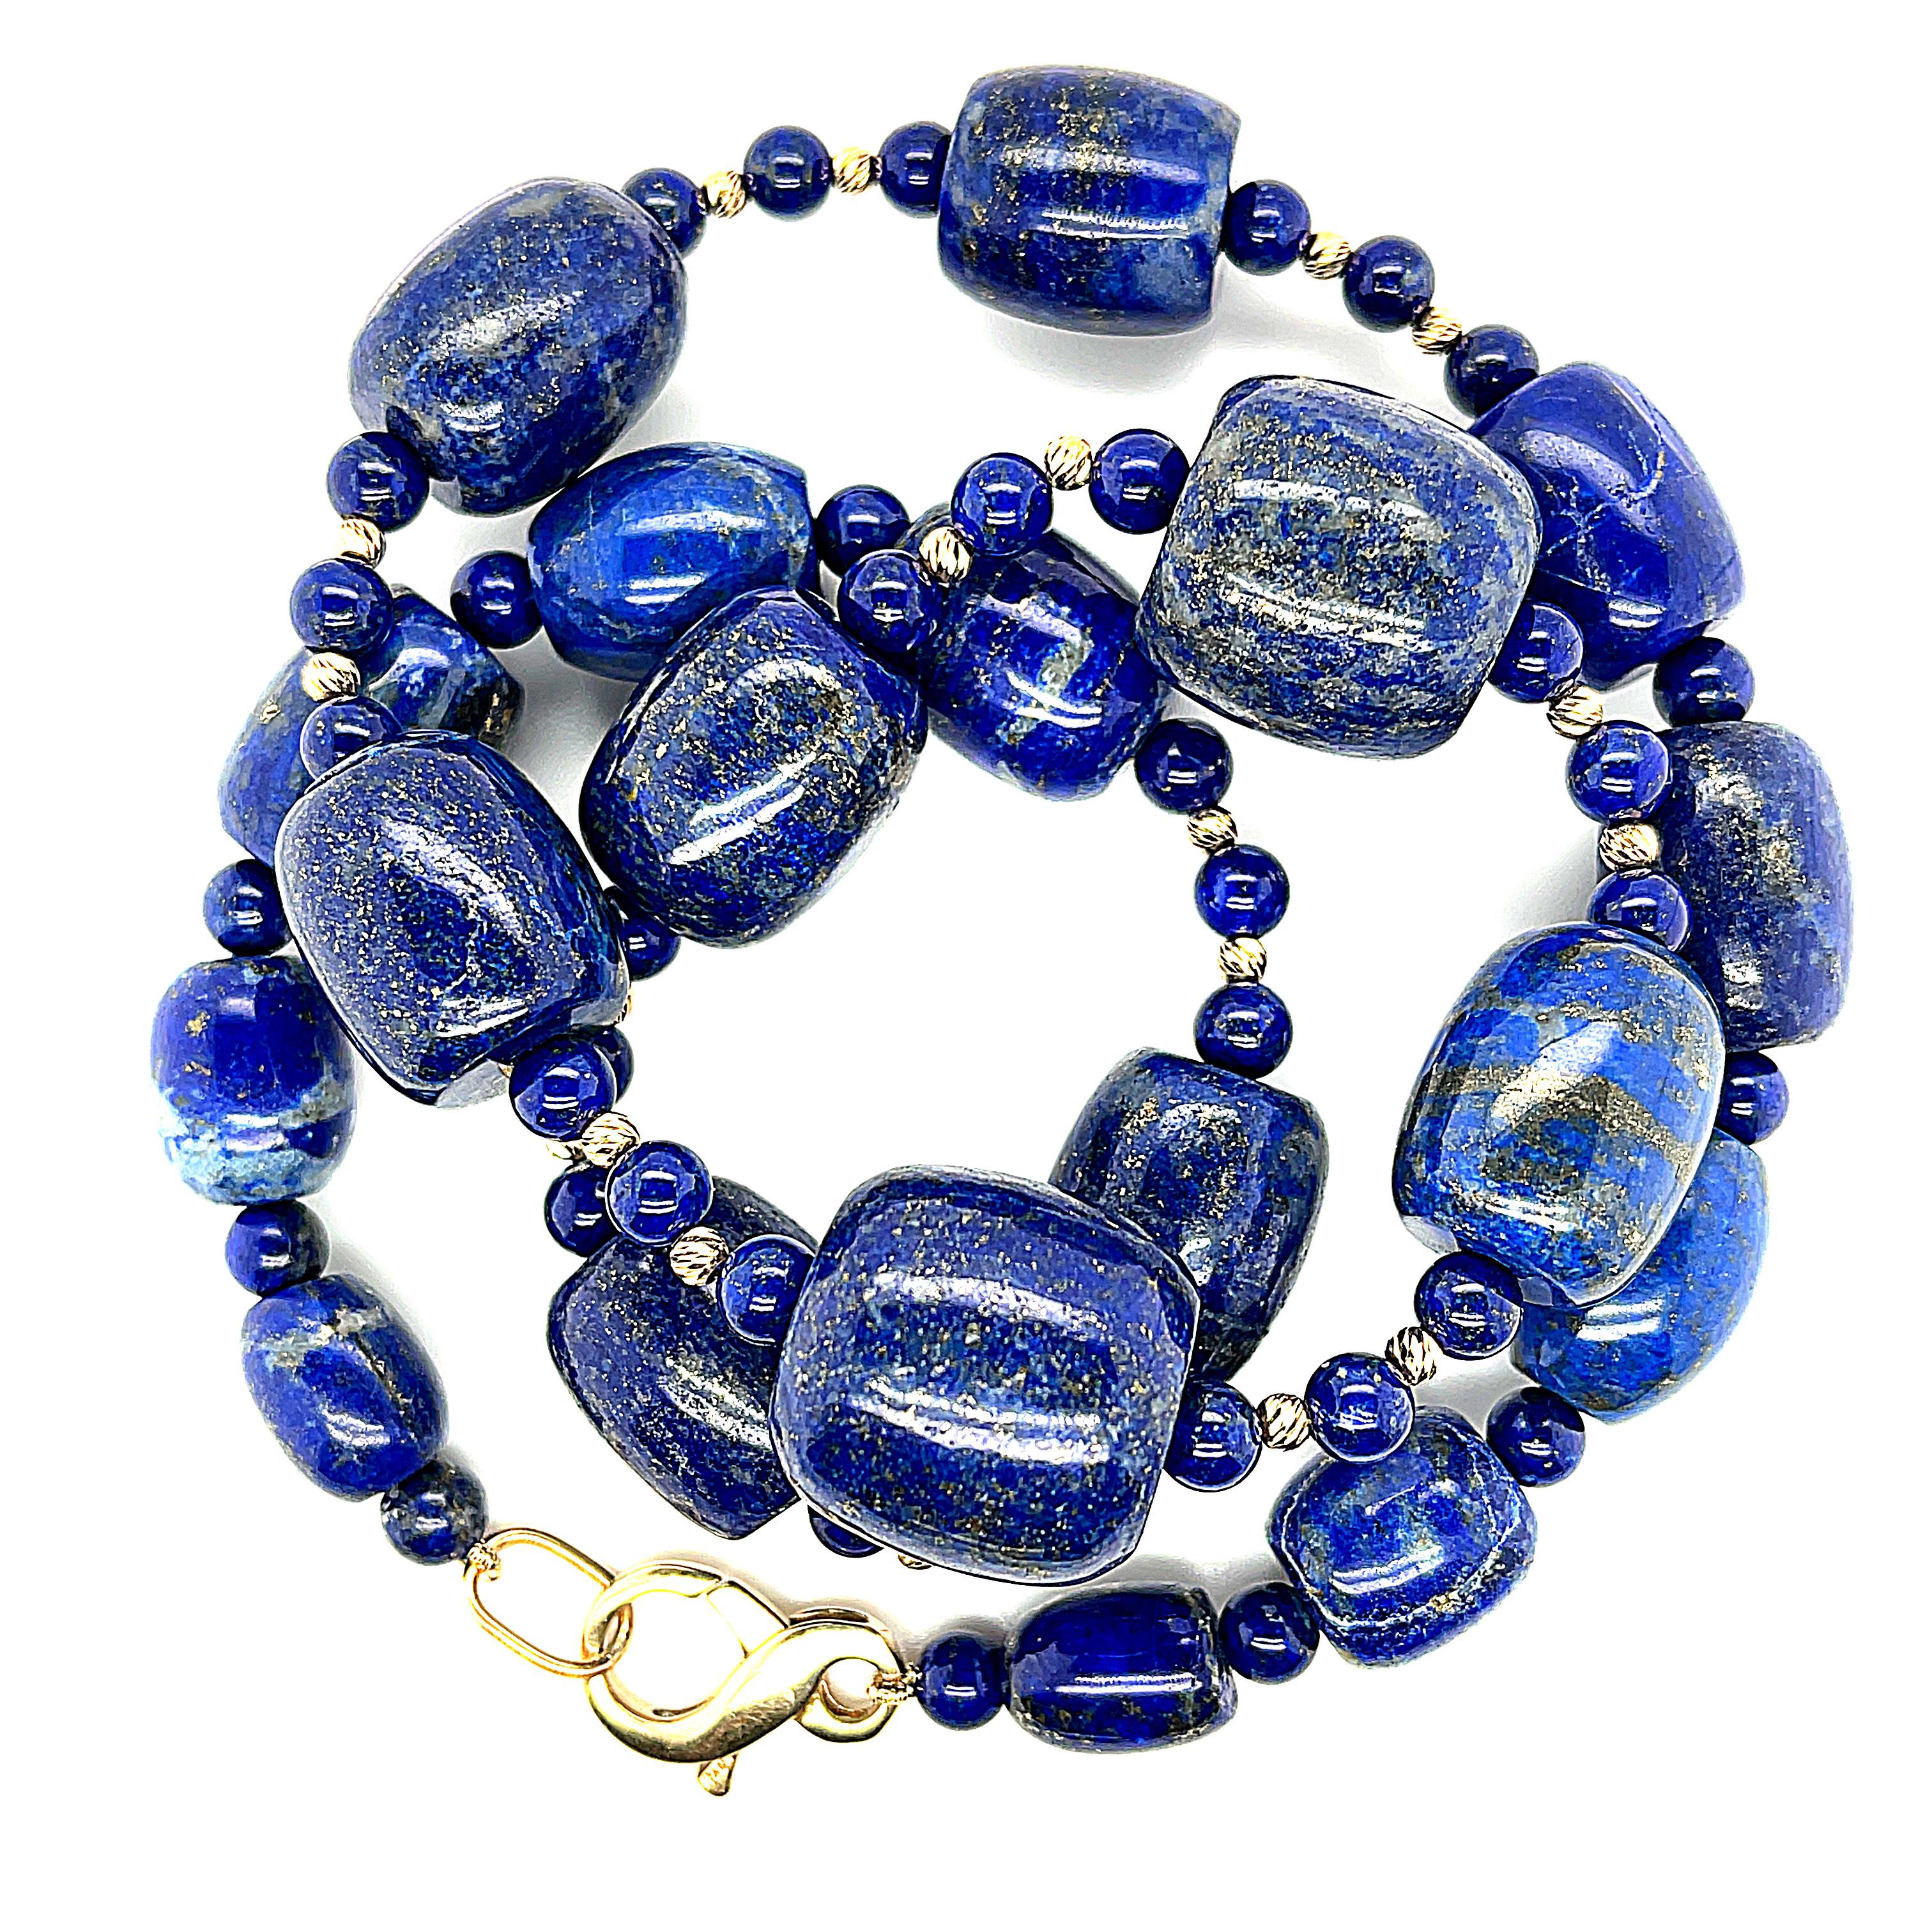 Barrel Shaped Lapis Lazuli Beaded Necklace with Yellow Gold Accents, 24 Inches In New Condition For Sale In Los Angeles, CA